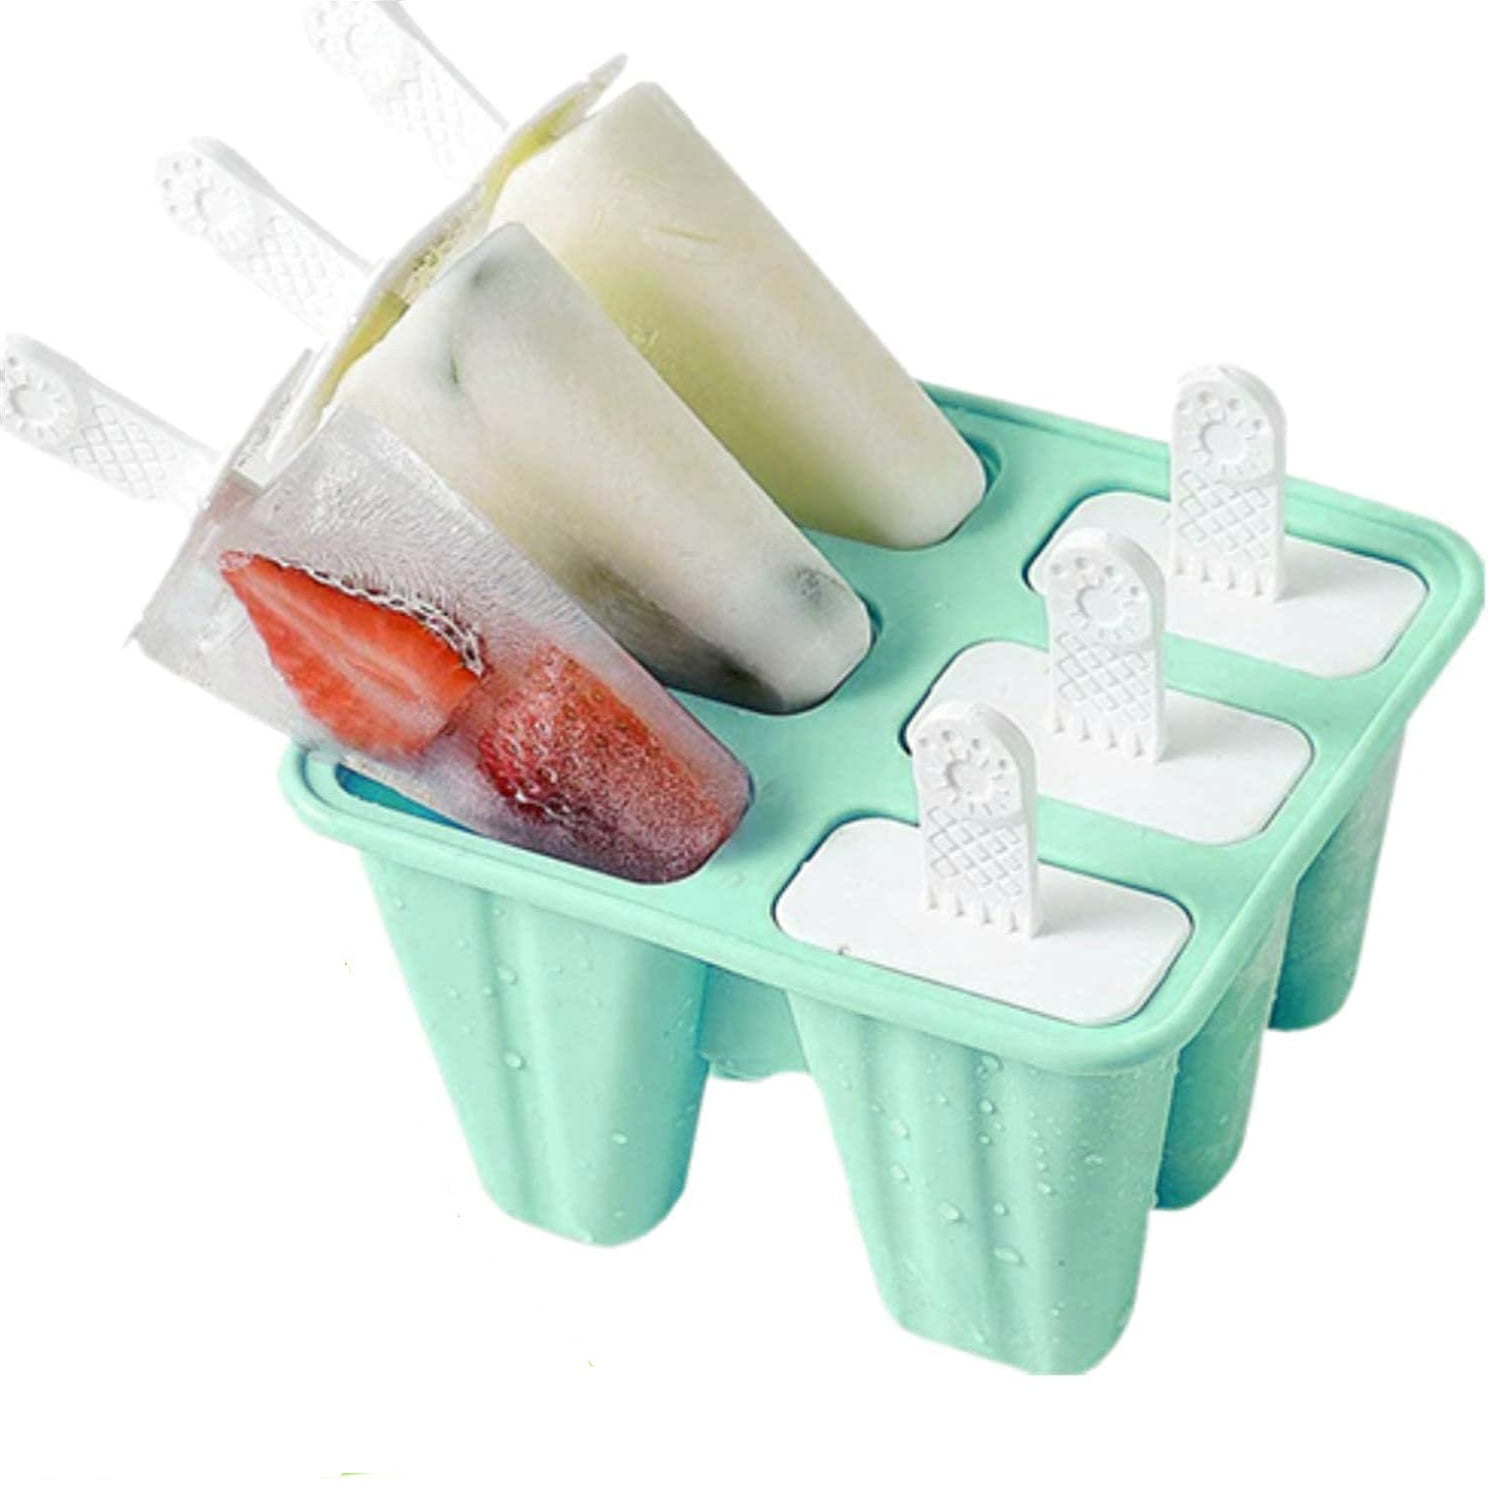 1set Silicone Ice Pop Mold, Modern Color Block Popsicle Maker Mold